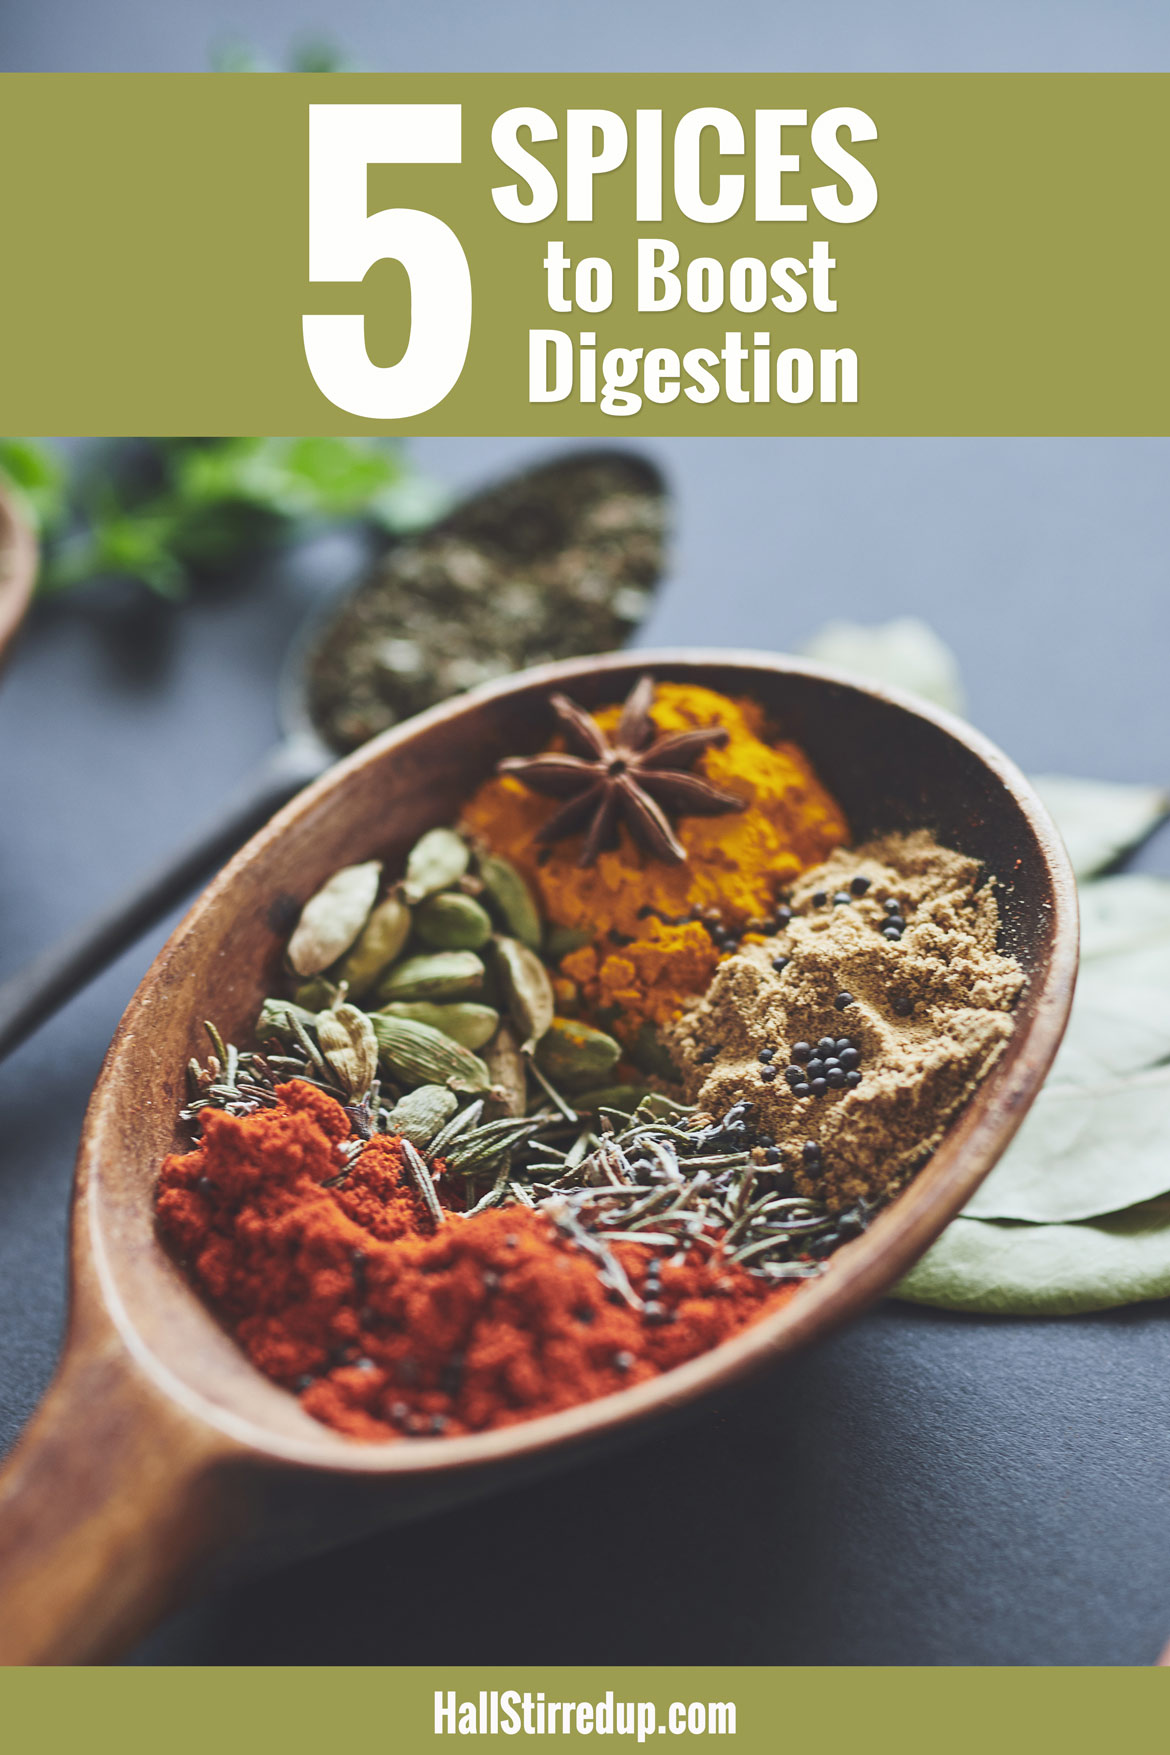 5 Spices to Boost Digestion